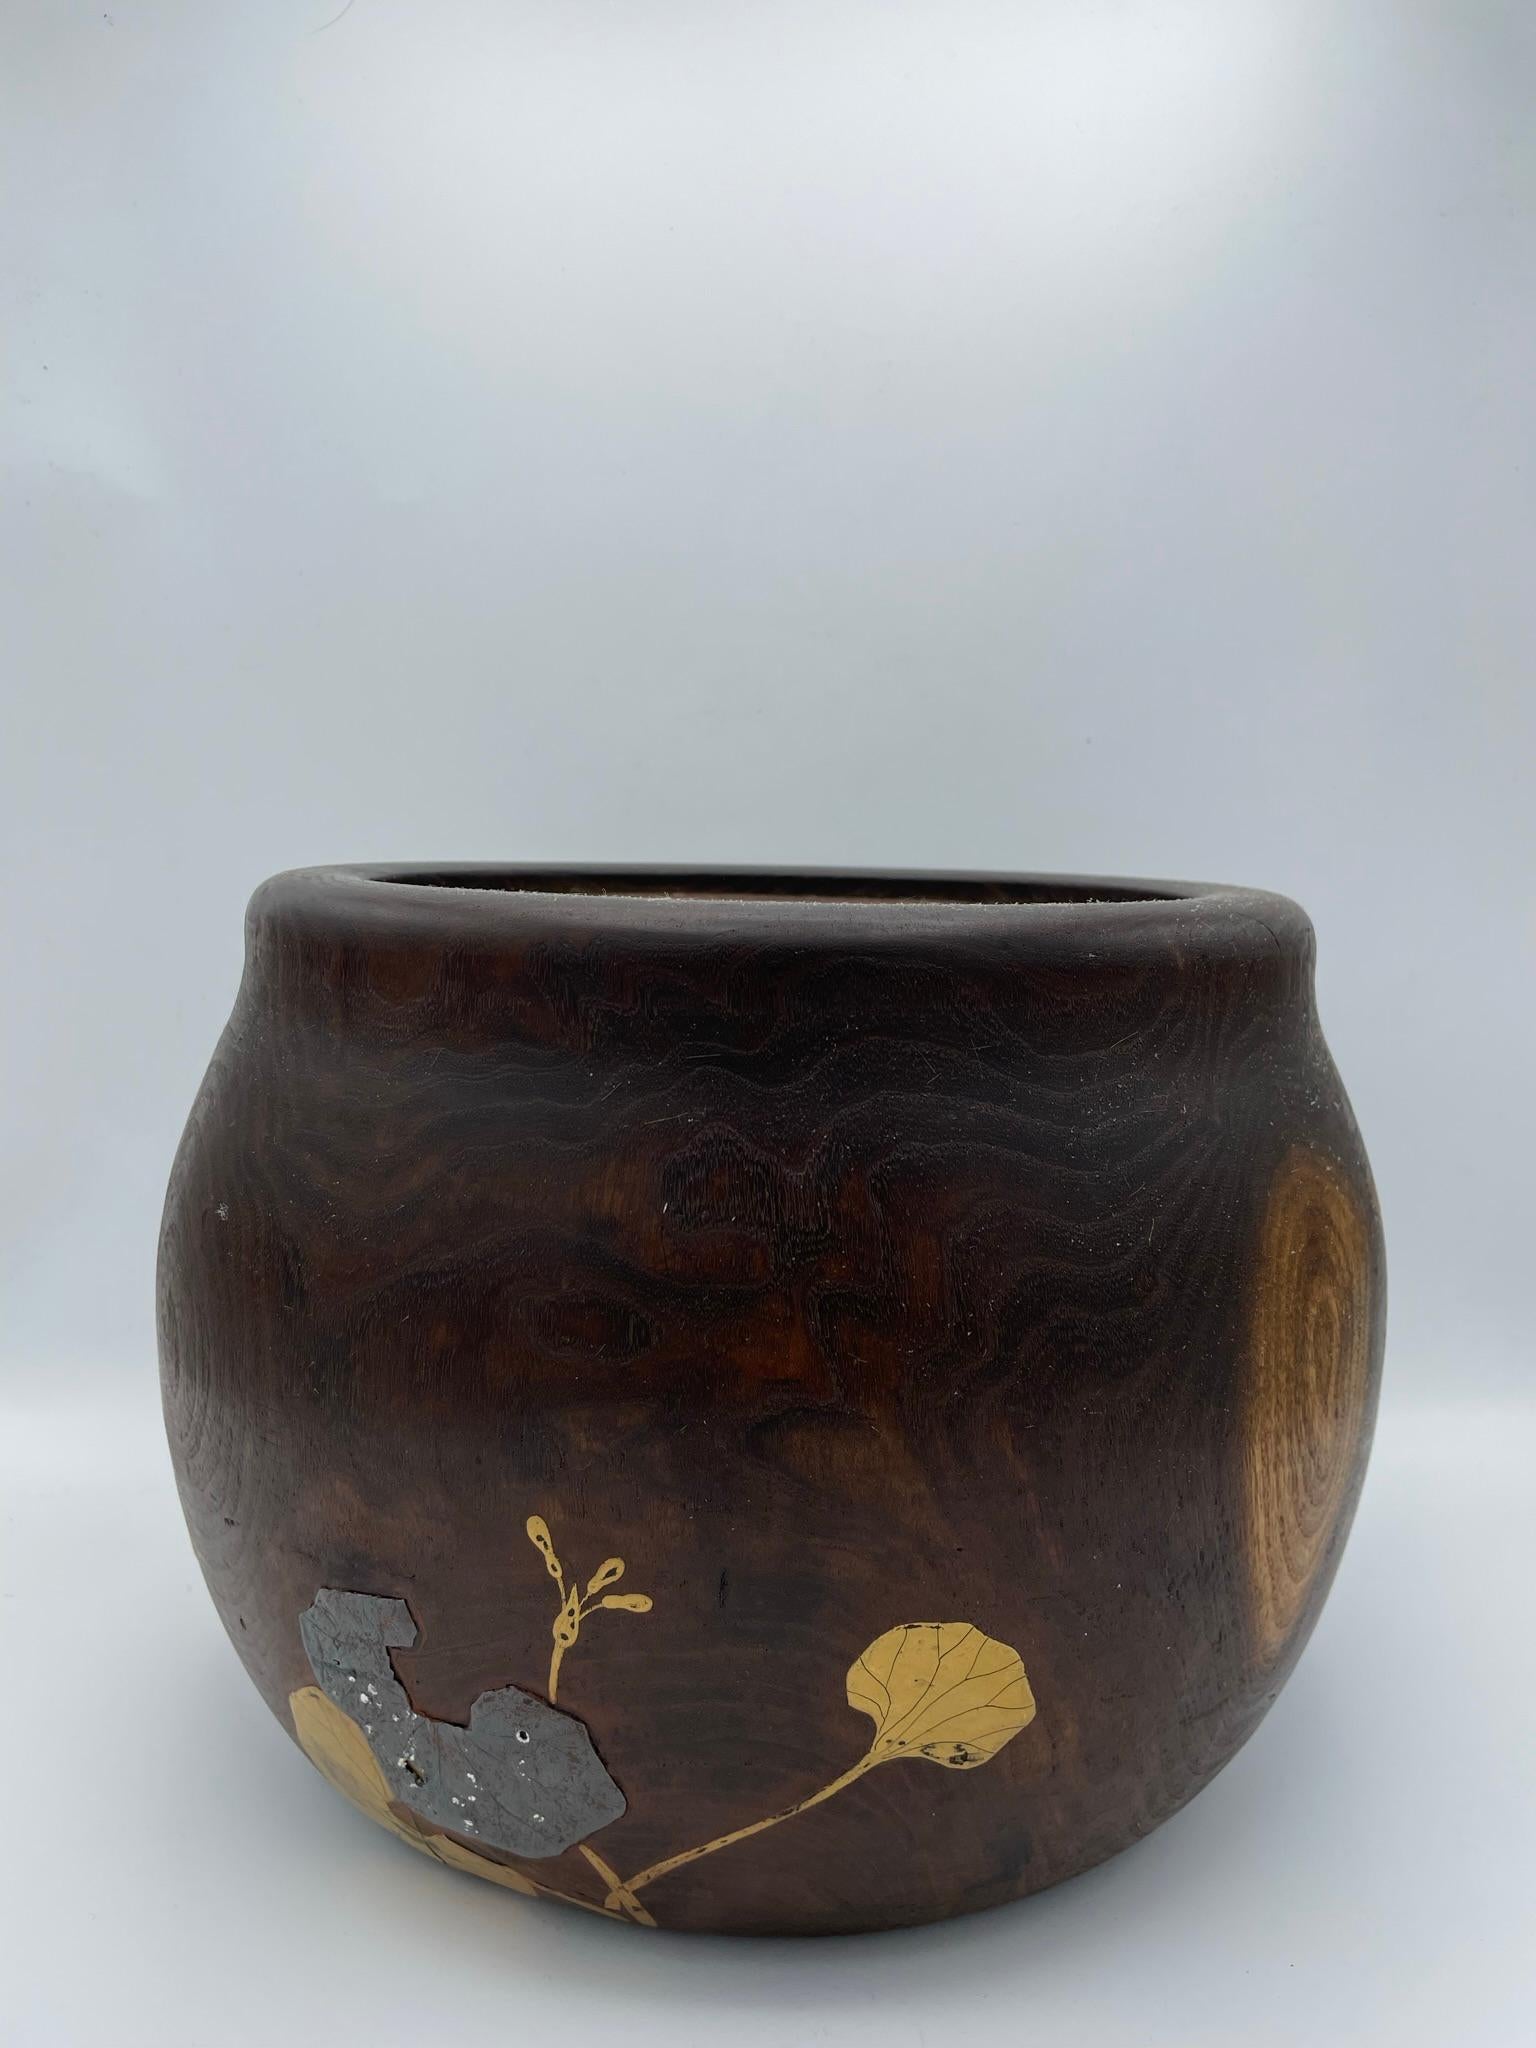 Japanese Wooden Cachepot 1920 'Made from One Tree' For Sale 9